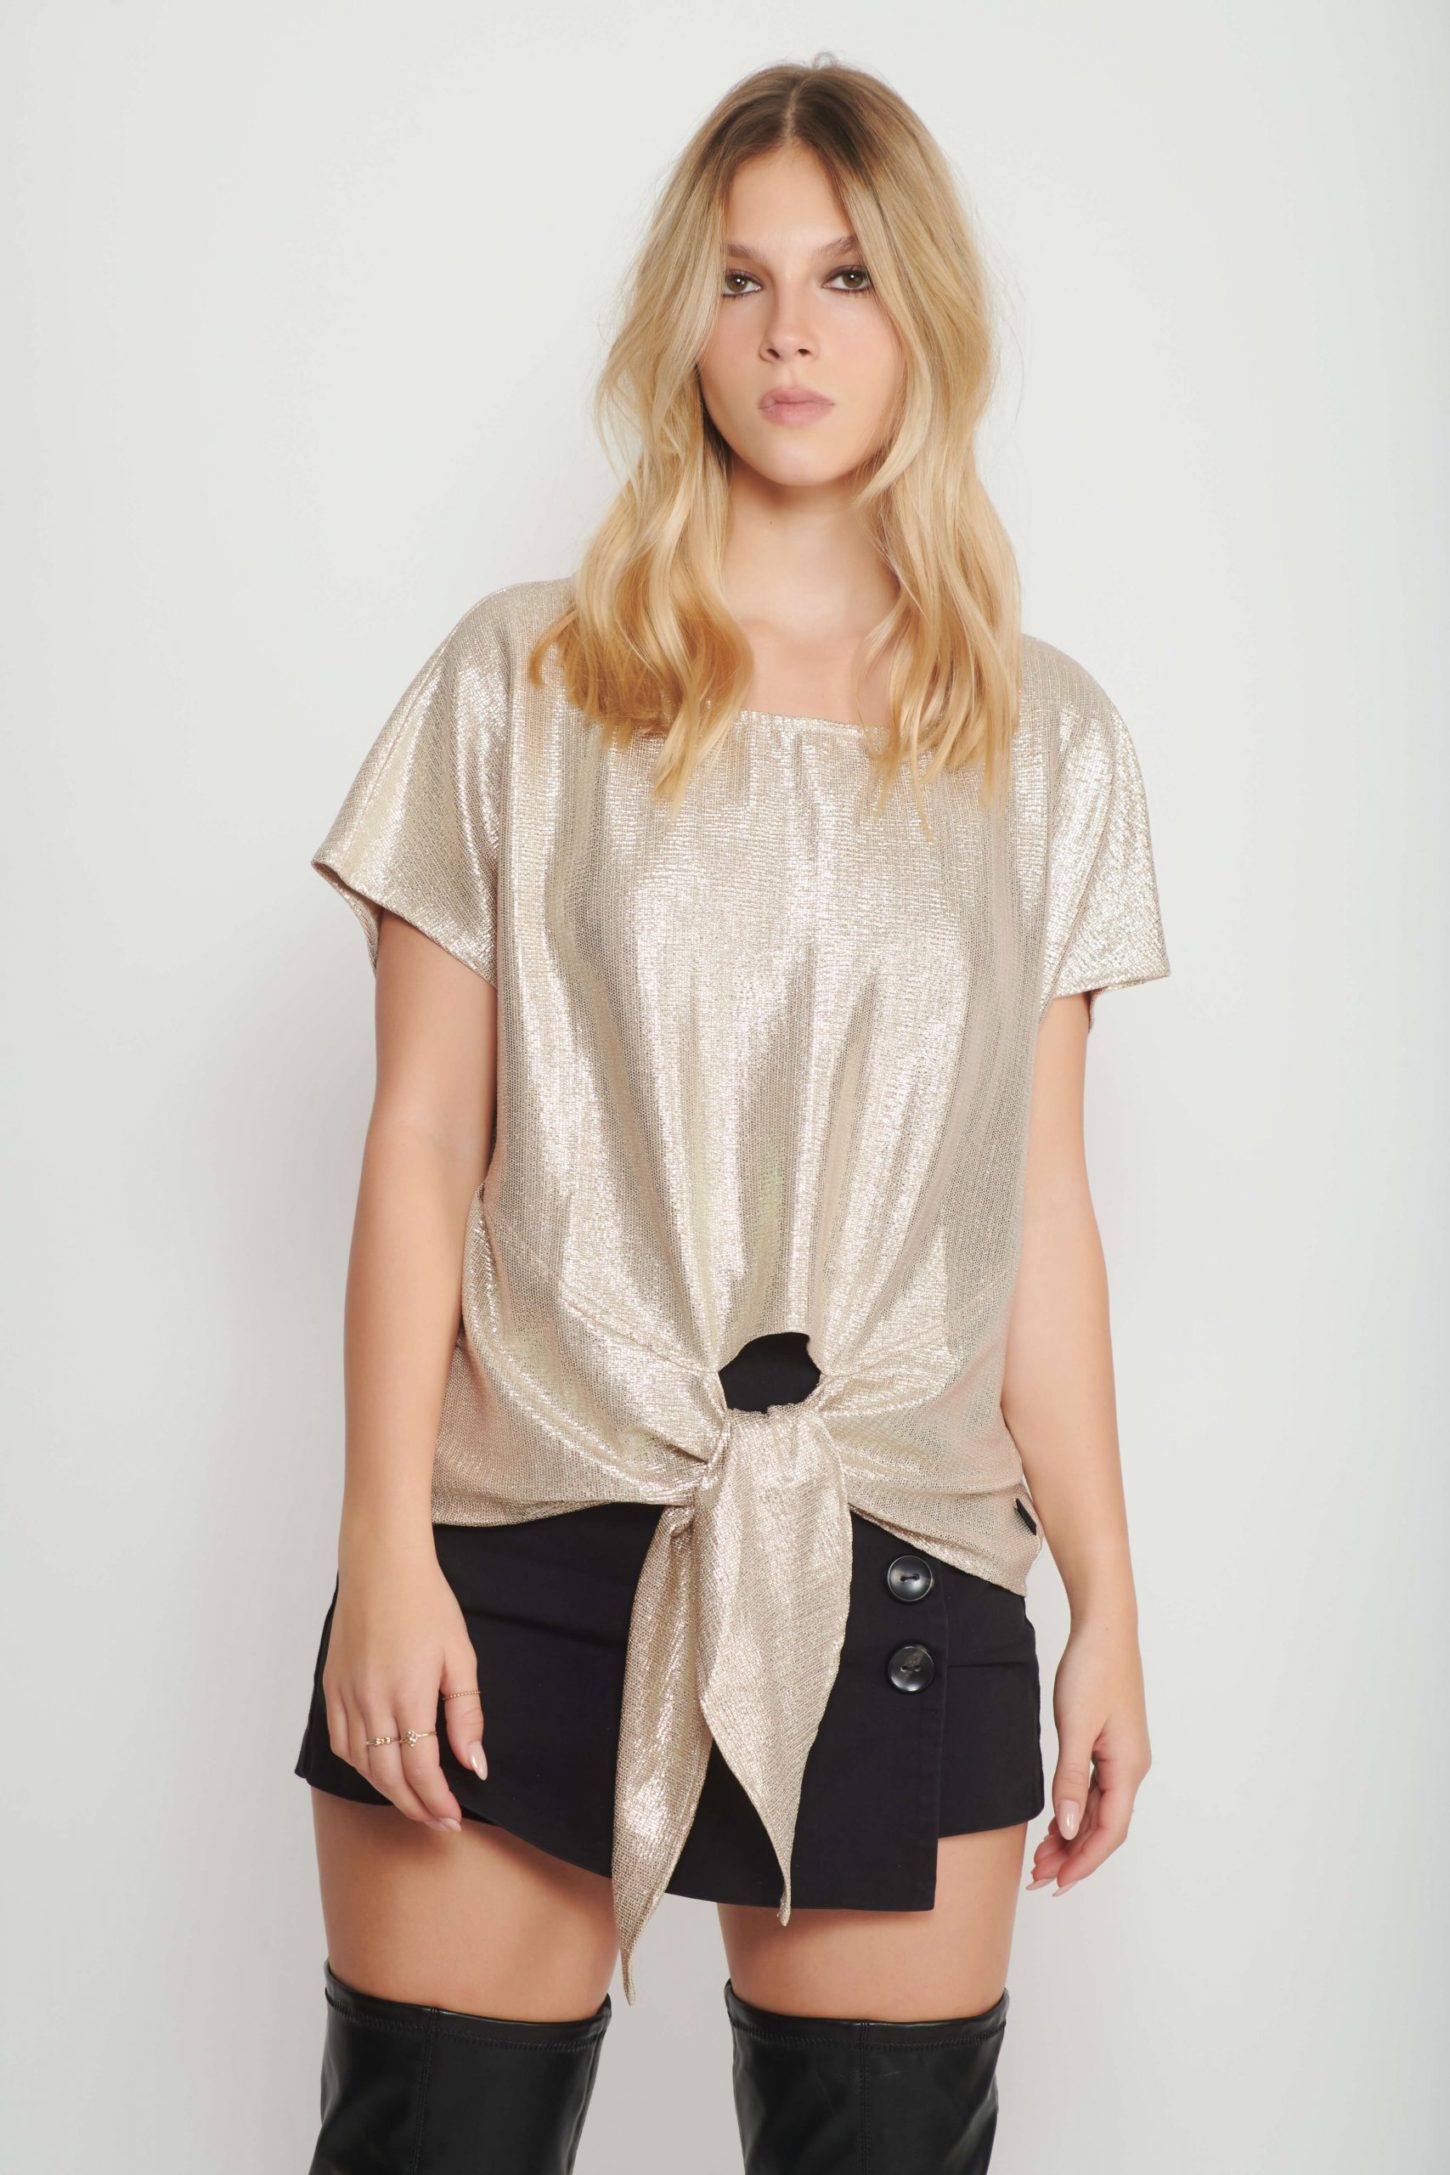 Silver Bow Shirt for Women